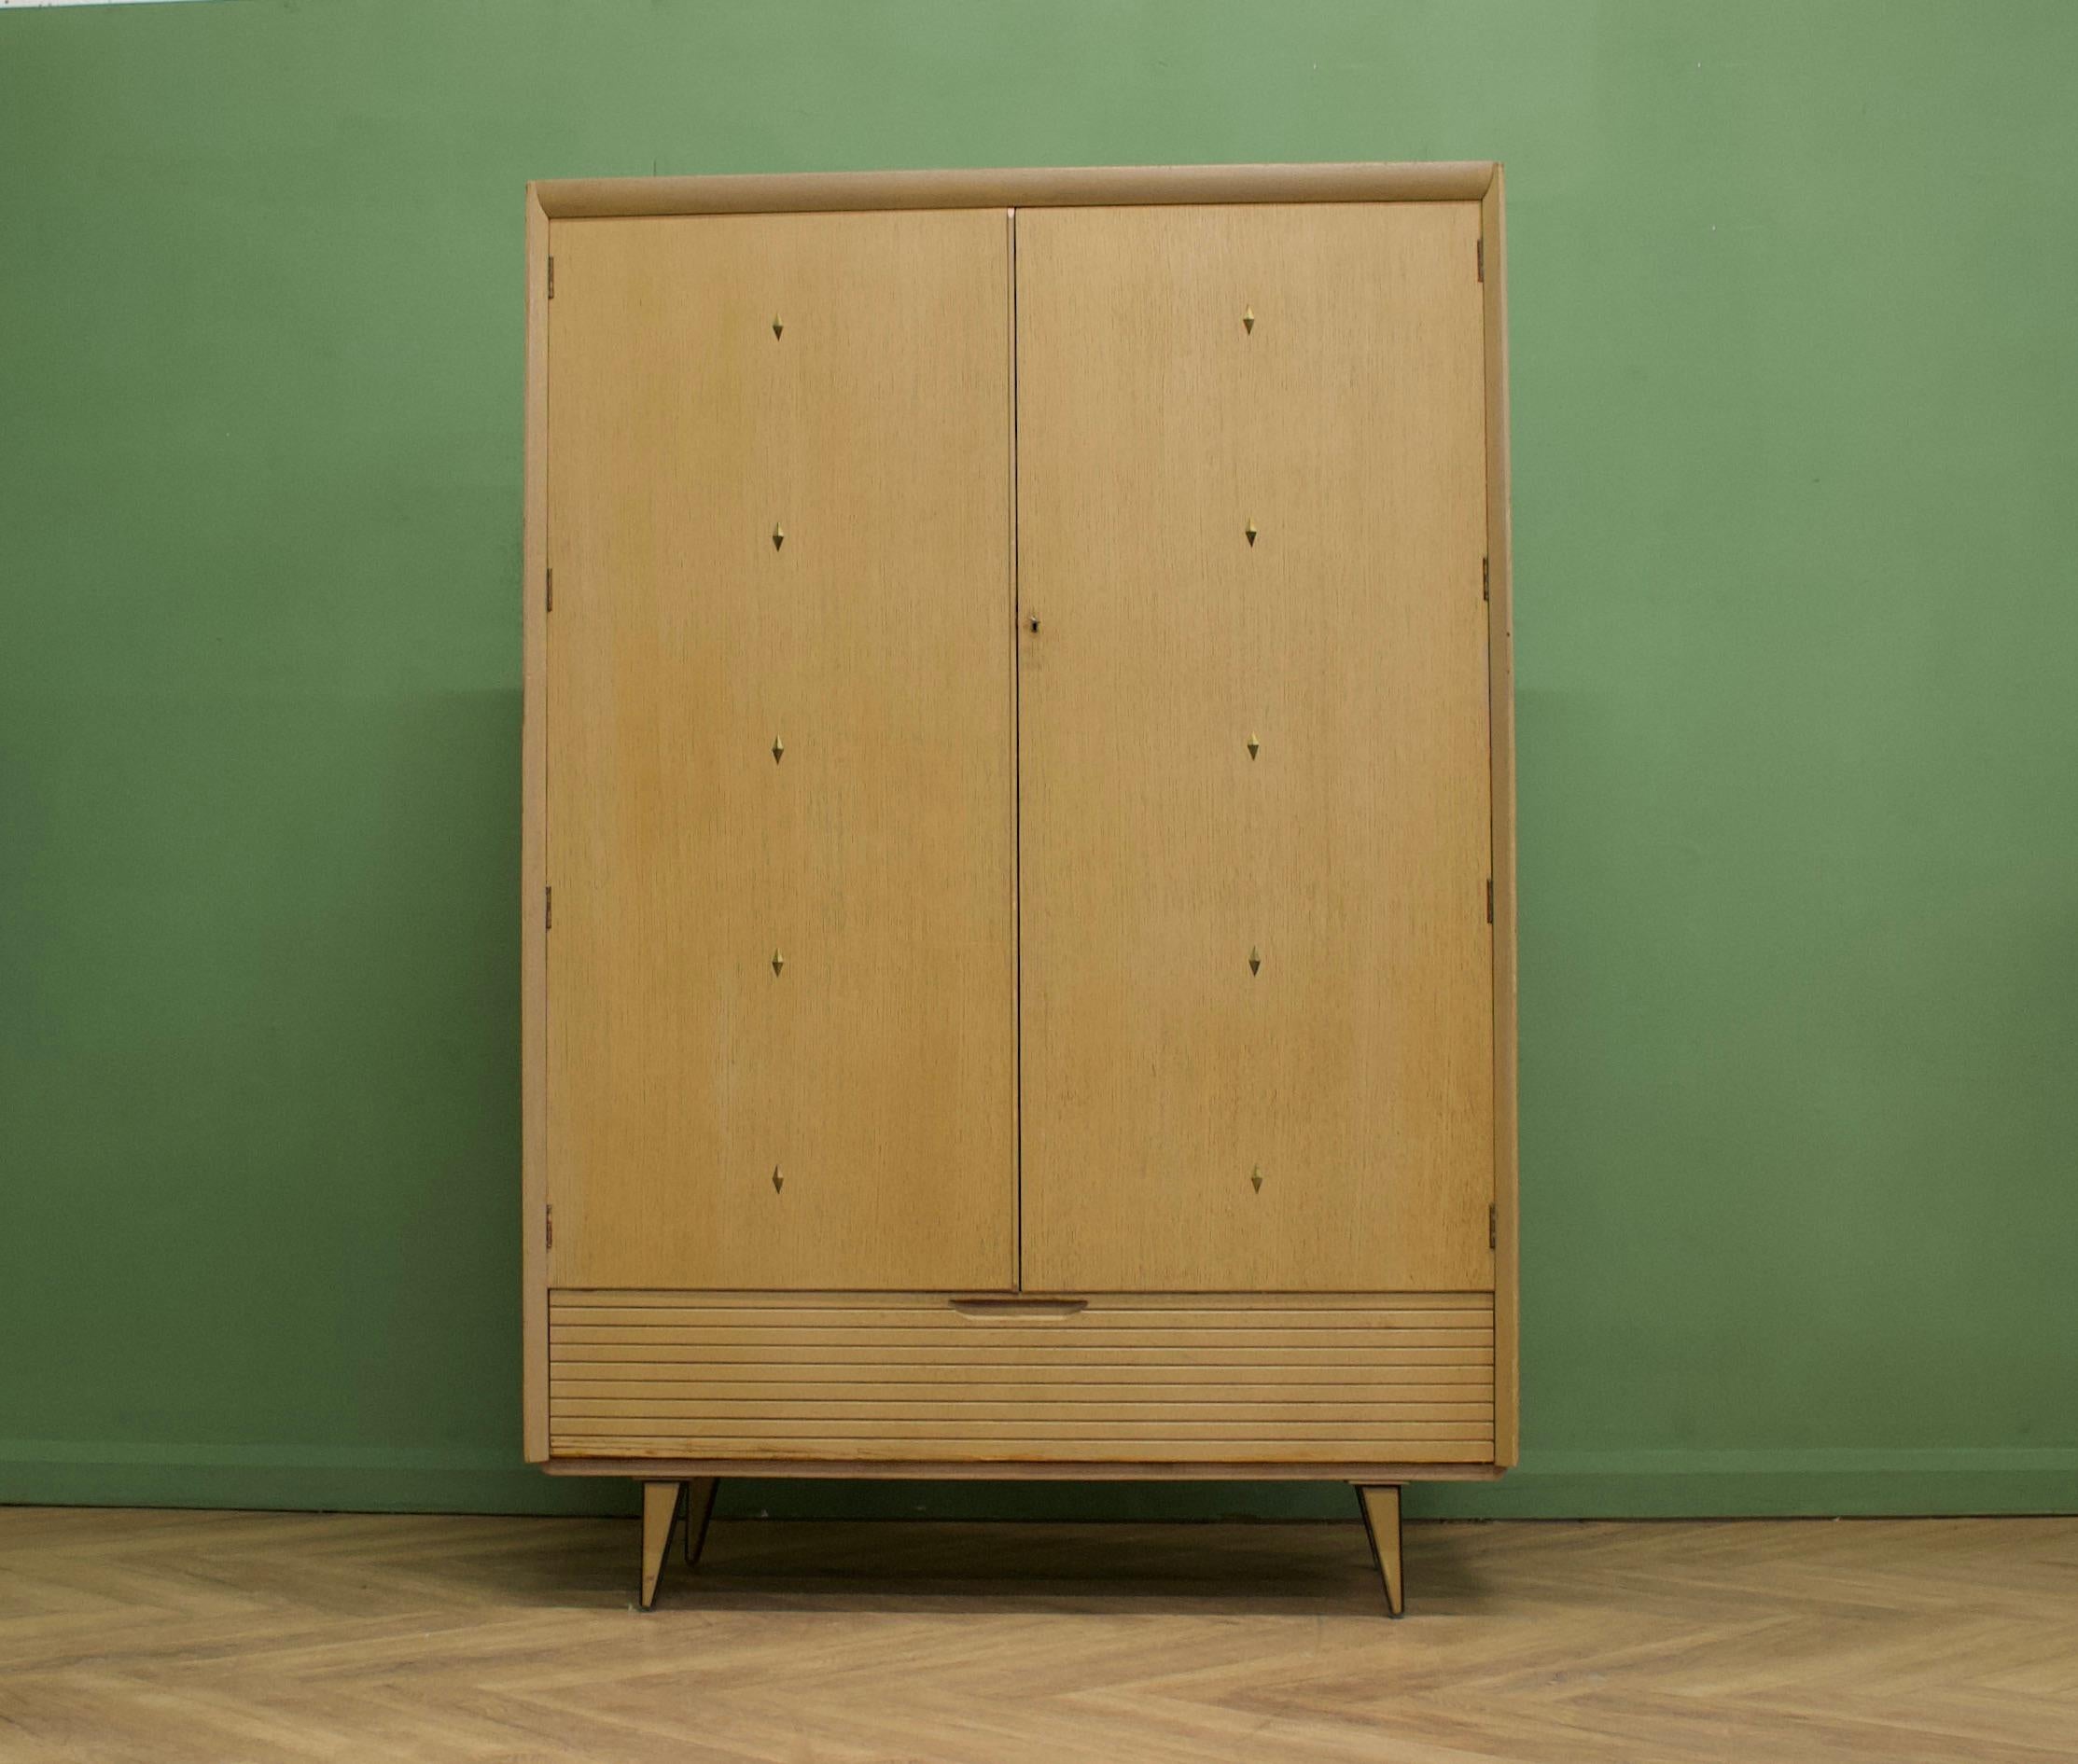 - Mid century modern wardrobe
- Manufactured by Lebus from the Atomic Range
- Limed oak effect & teak
- Features a rail the full width and a pull down cupboard to the bottom